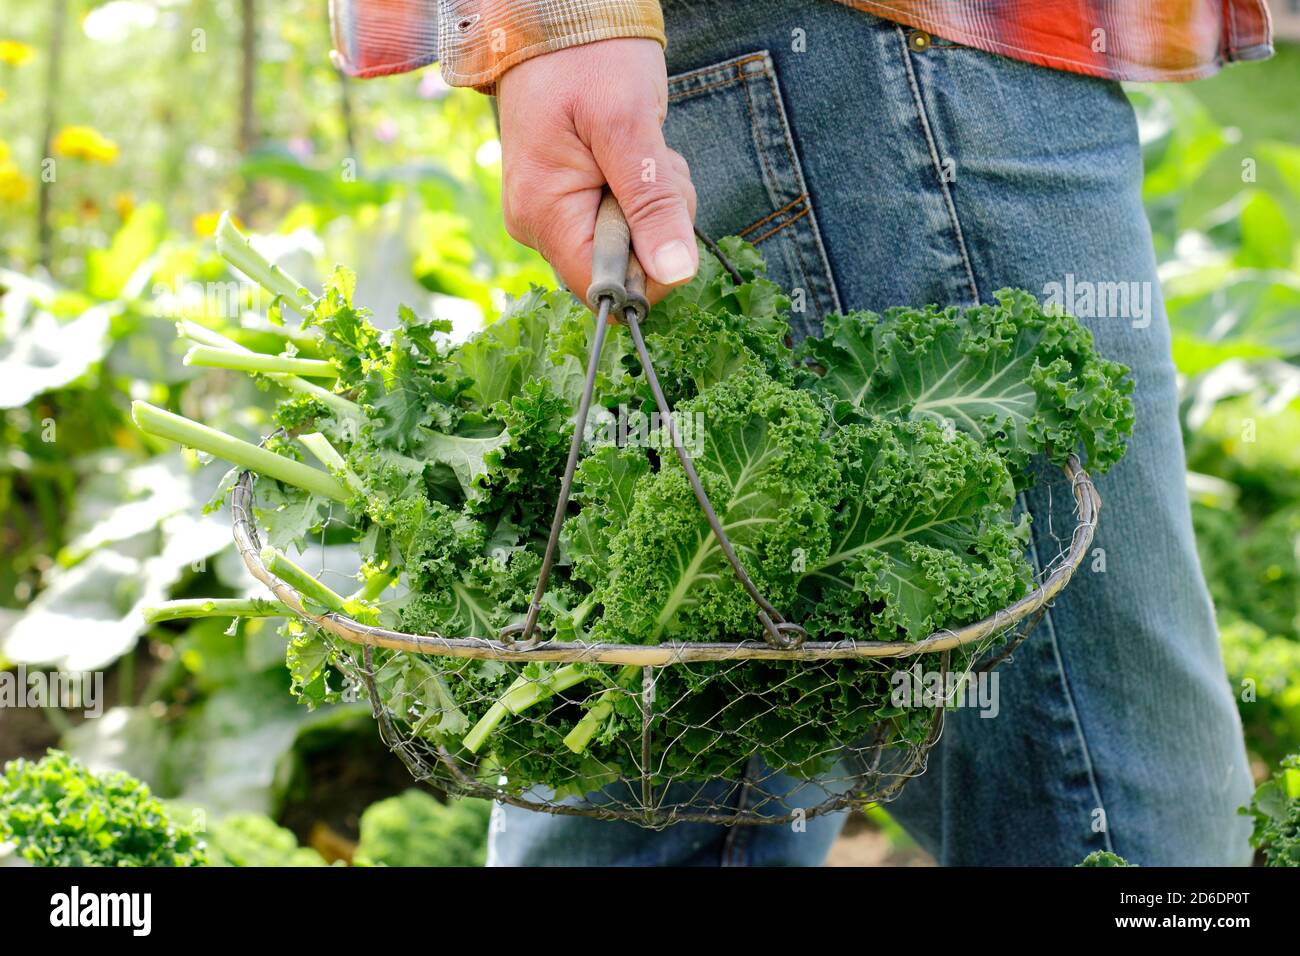 Brassica oleracea 'Dwarf Green Curled'. Freshly picked curly kale grown in the domestic vegetable plot pictured. UK Stock Photo